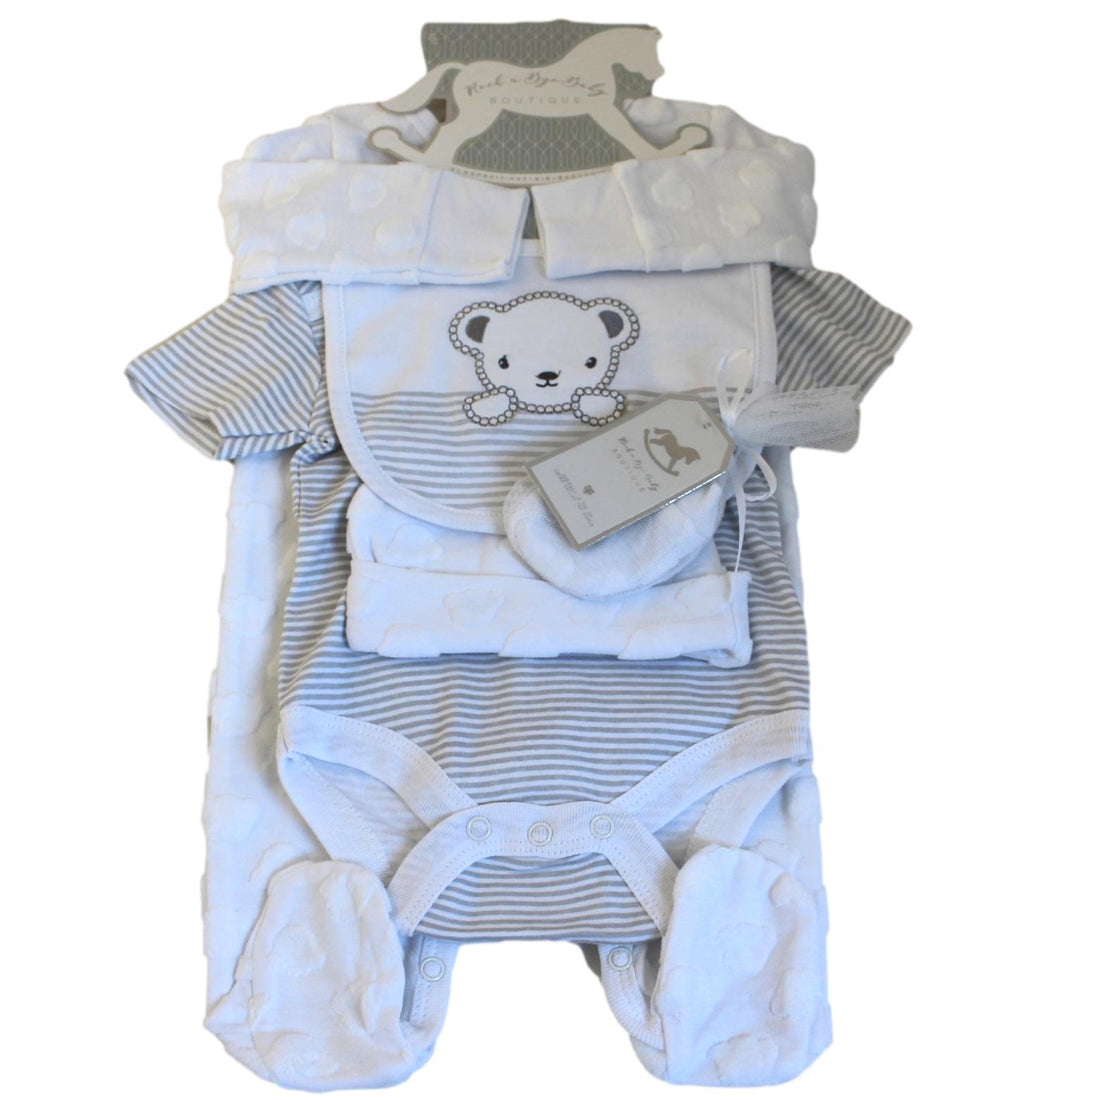 Teddy Themed Unisex 5 Piece Baby Clothes Set